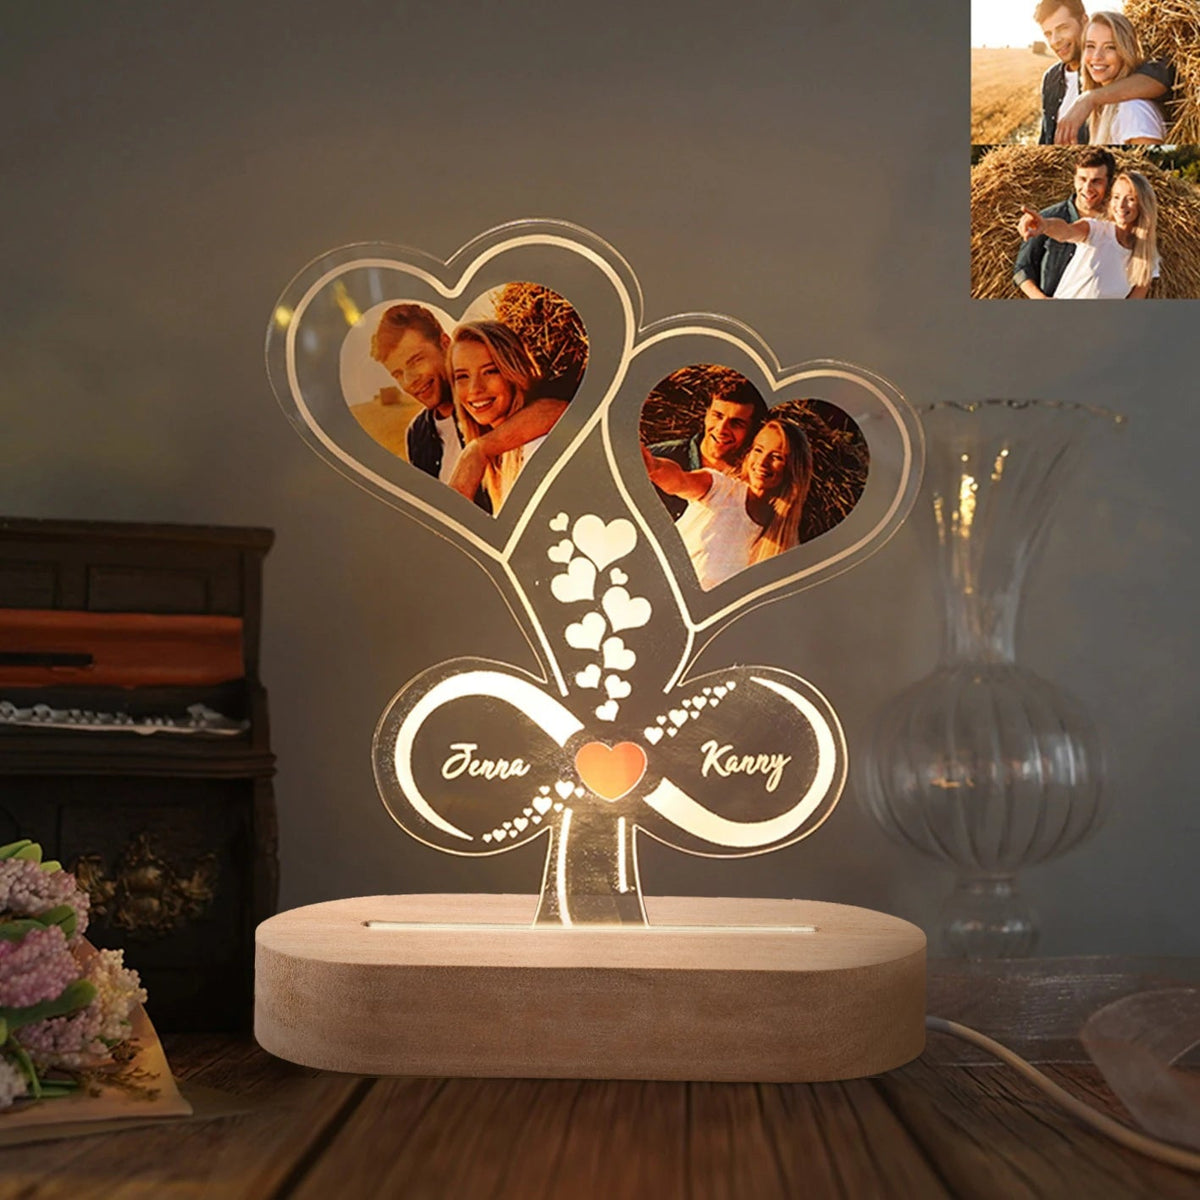 Custom Photo Night Light - Engraved 3D Lamp with Personalized Photo, Gift for Her, Engagement, Couple, Personalized Anniversary Gift for Bedroom Decor 1 color base / Free Custom 1